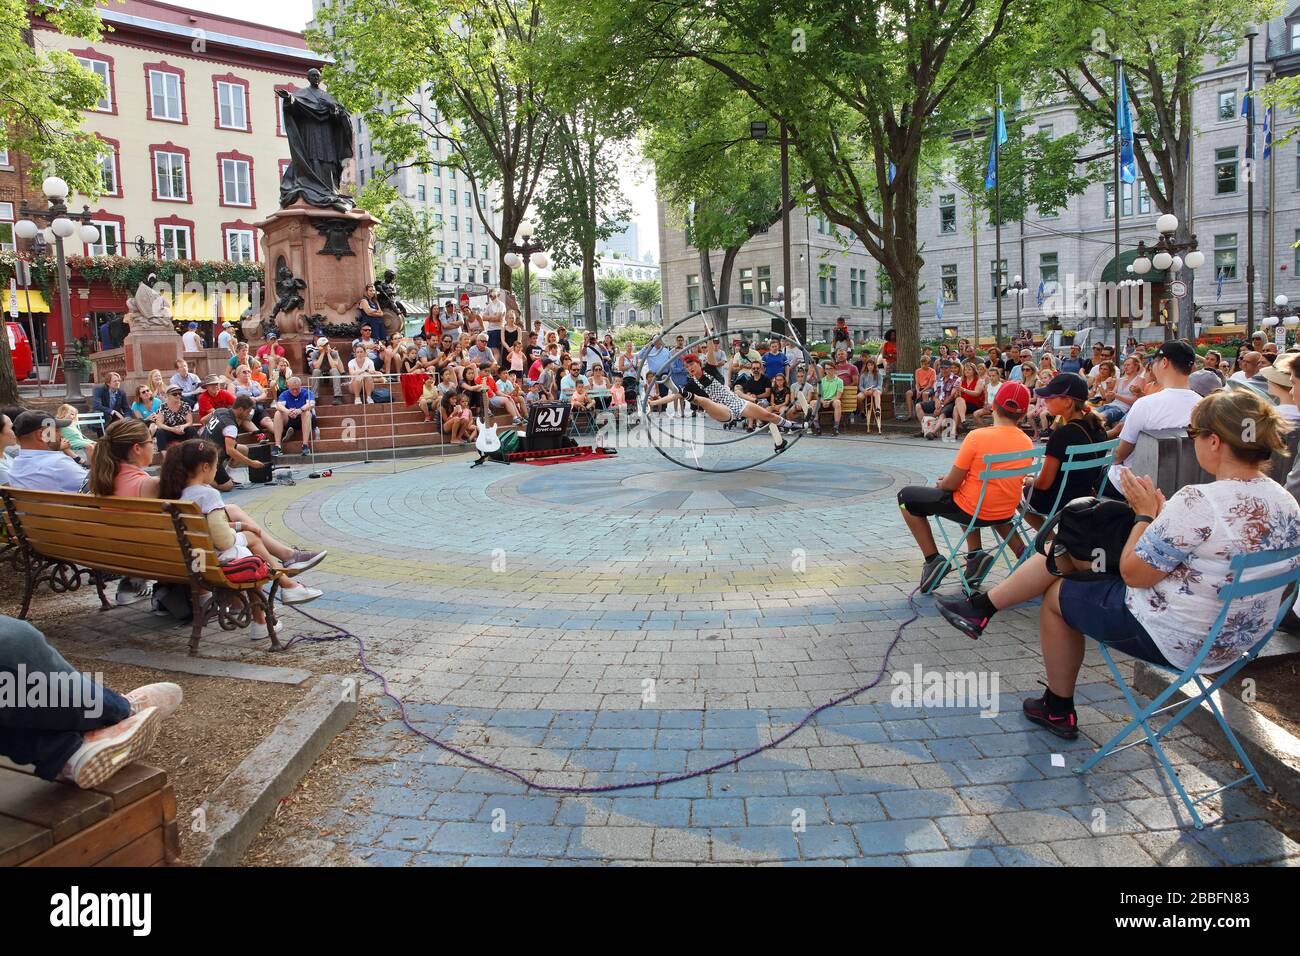 Crowd of people watching a woman on a German Wheel performing acrobatic tricks at Place de l'Hotel de Ville in Old Quebec City, Province of Quebec, Canada Stock Photo